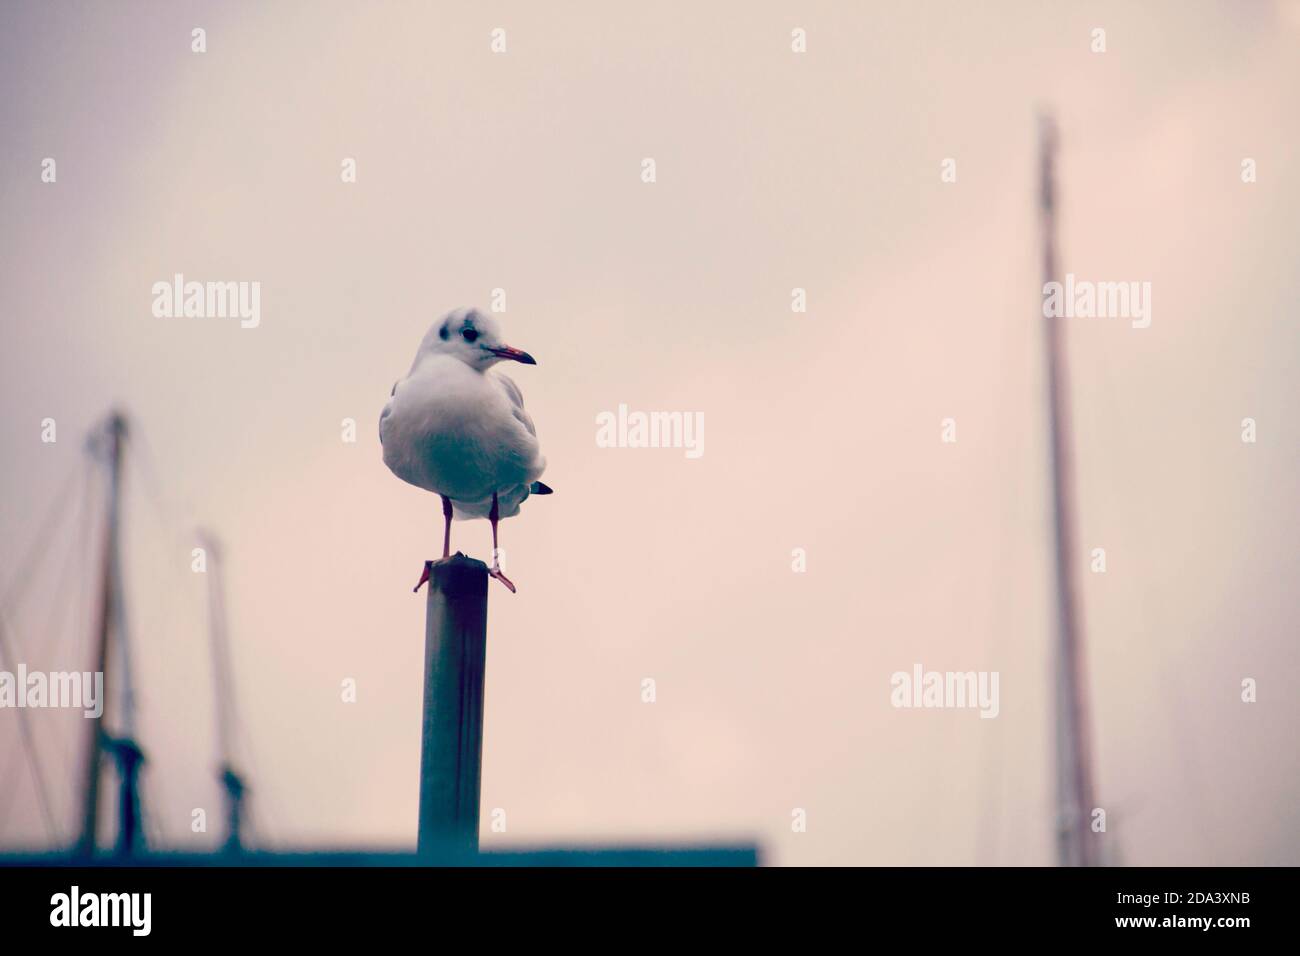 Single seagull posed on an iron rod in the harbor with blurred sailboat masts in background Stock Photo